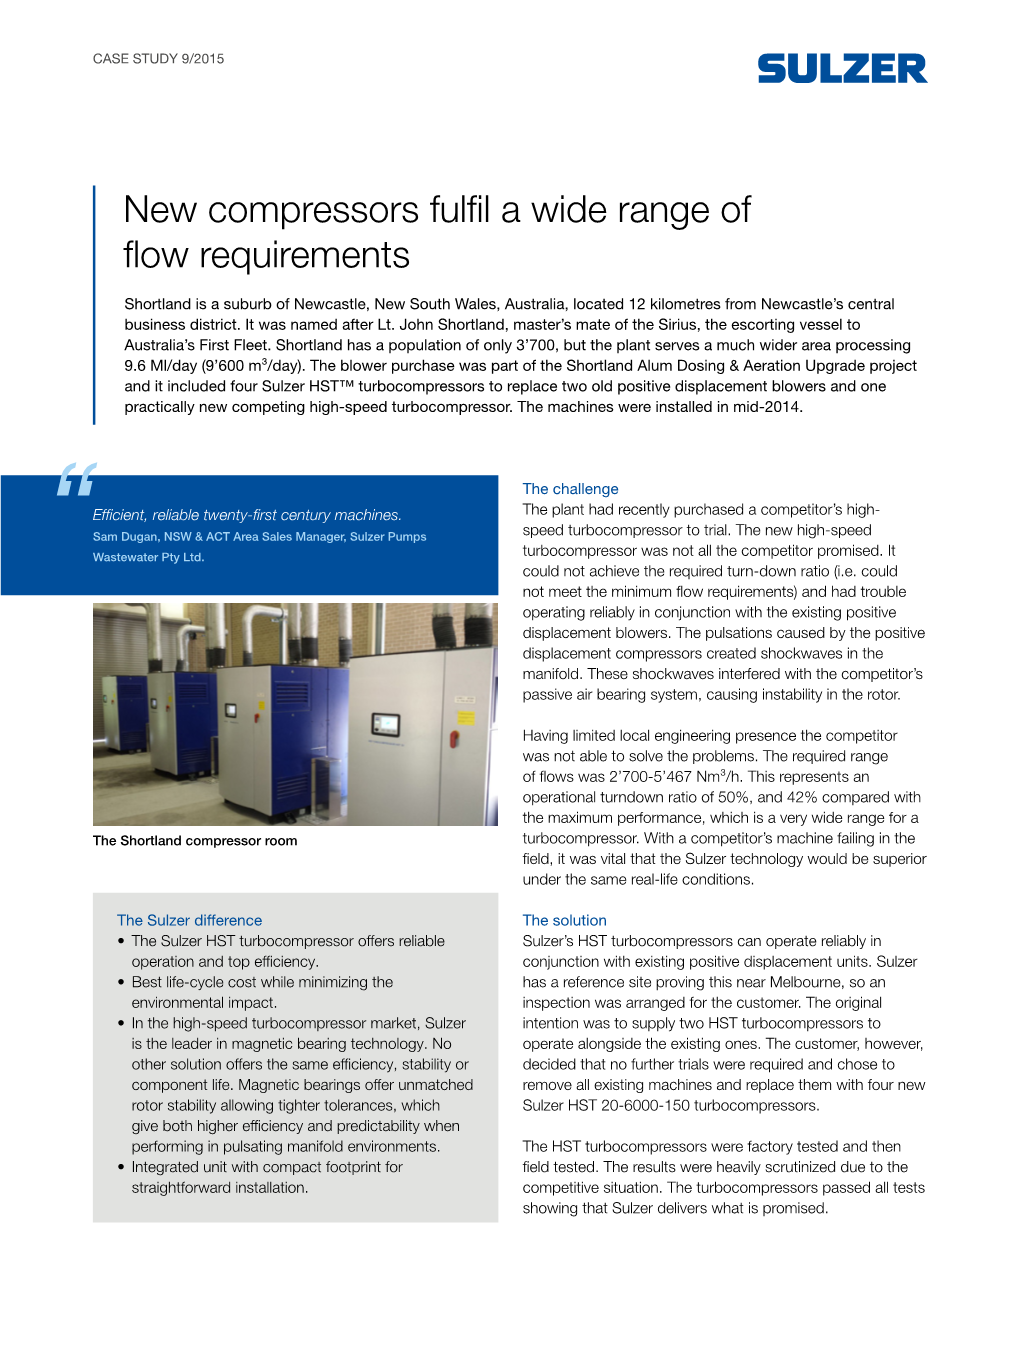 New Compressors Fulfil a Wide Range of Flow Requirements (Pdf)